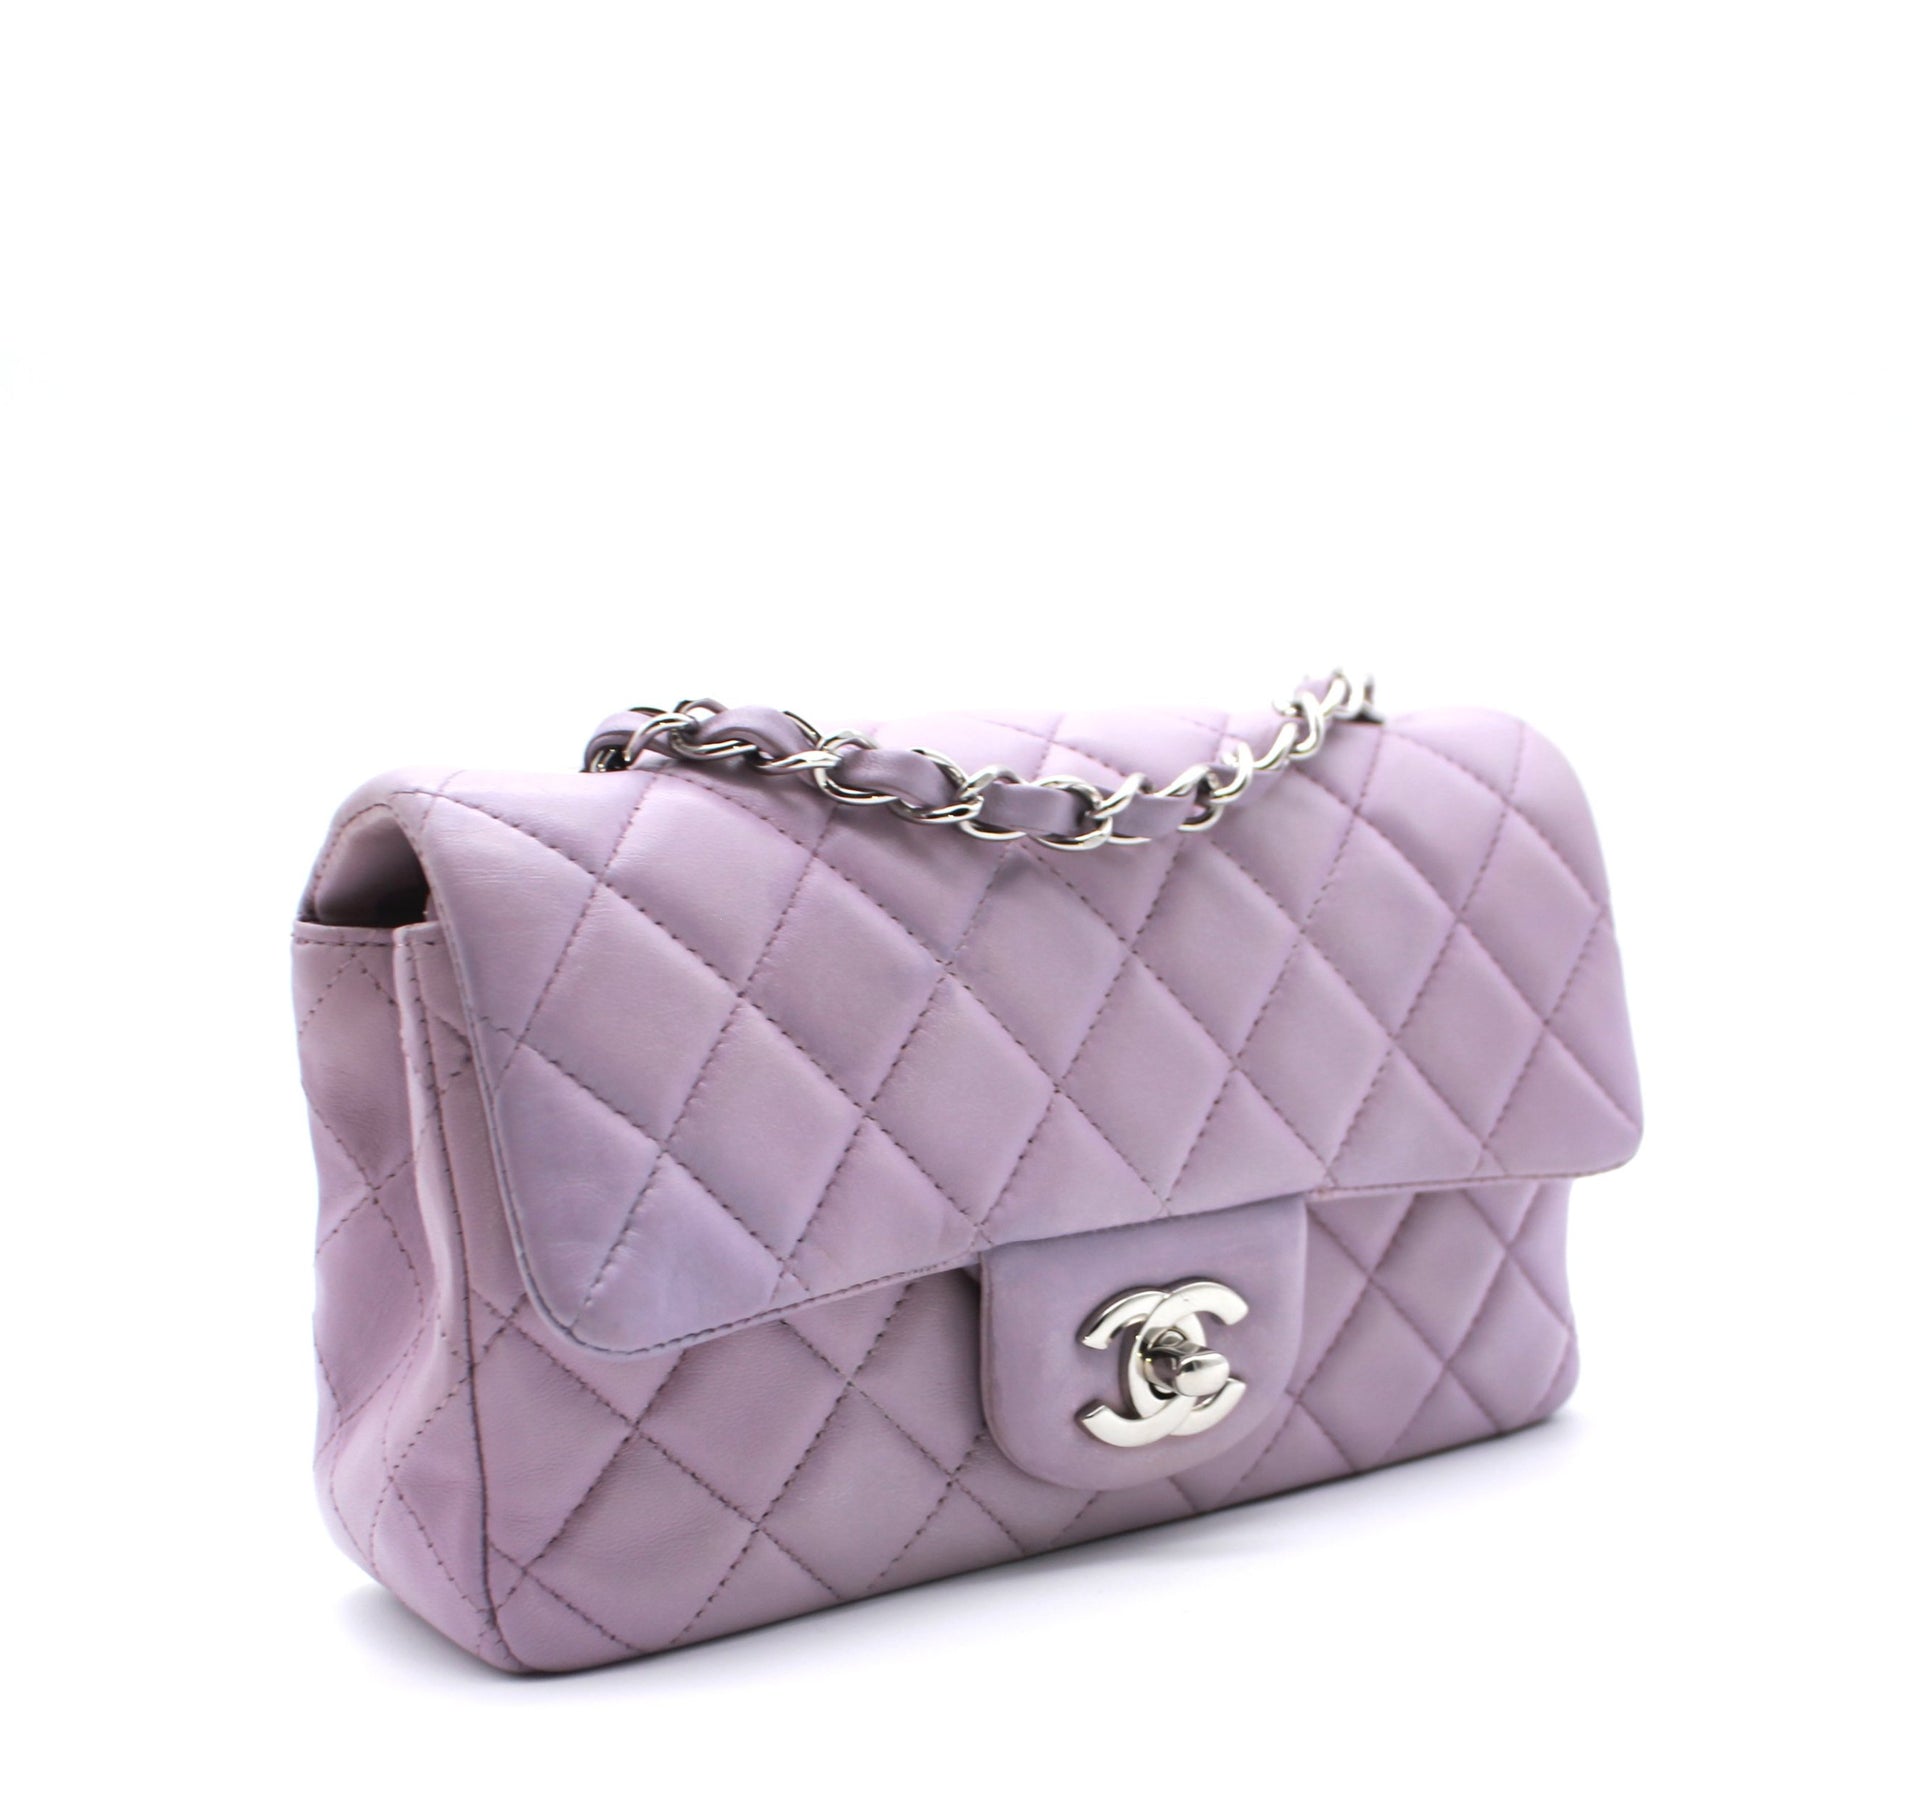 Stunning Chanel Quilted Lambskin Leather Lilac Light Purple